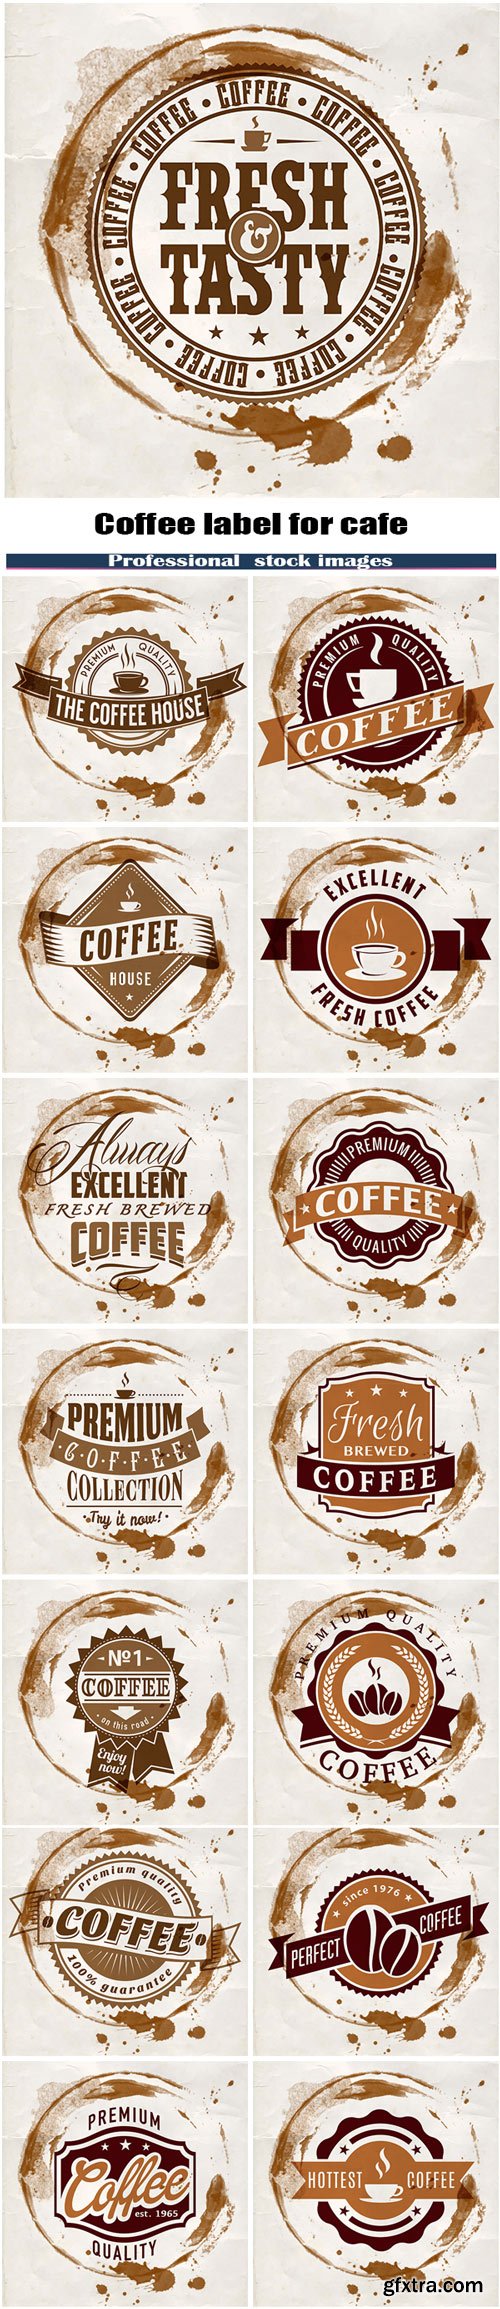 Coffee label for cafe